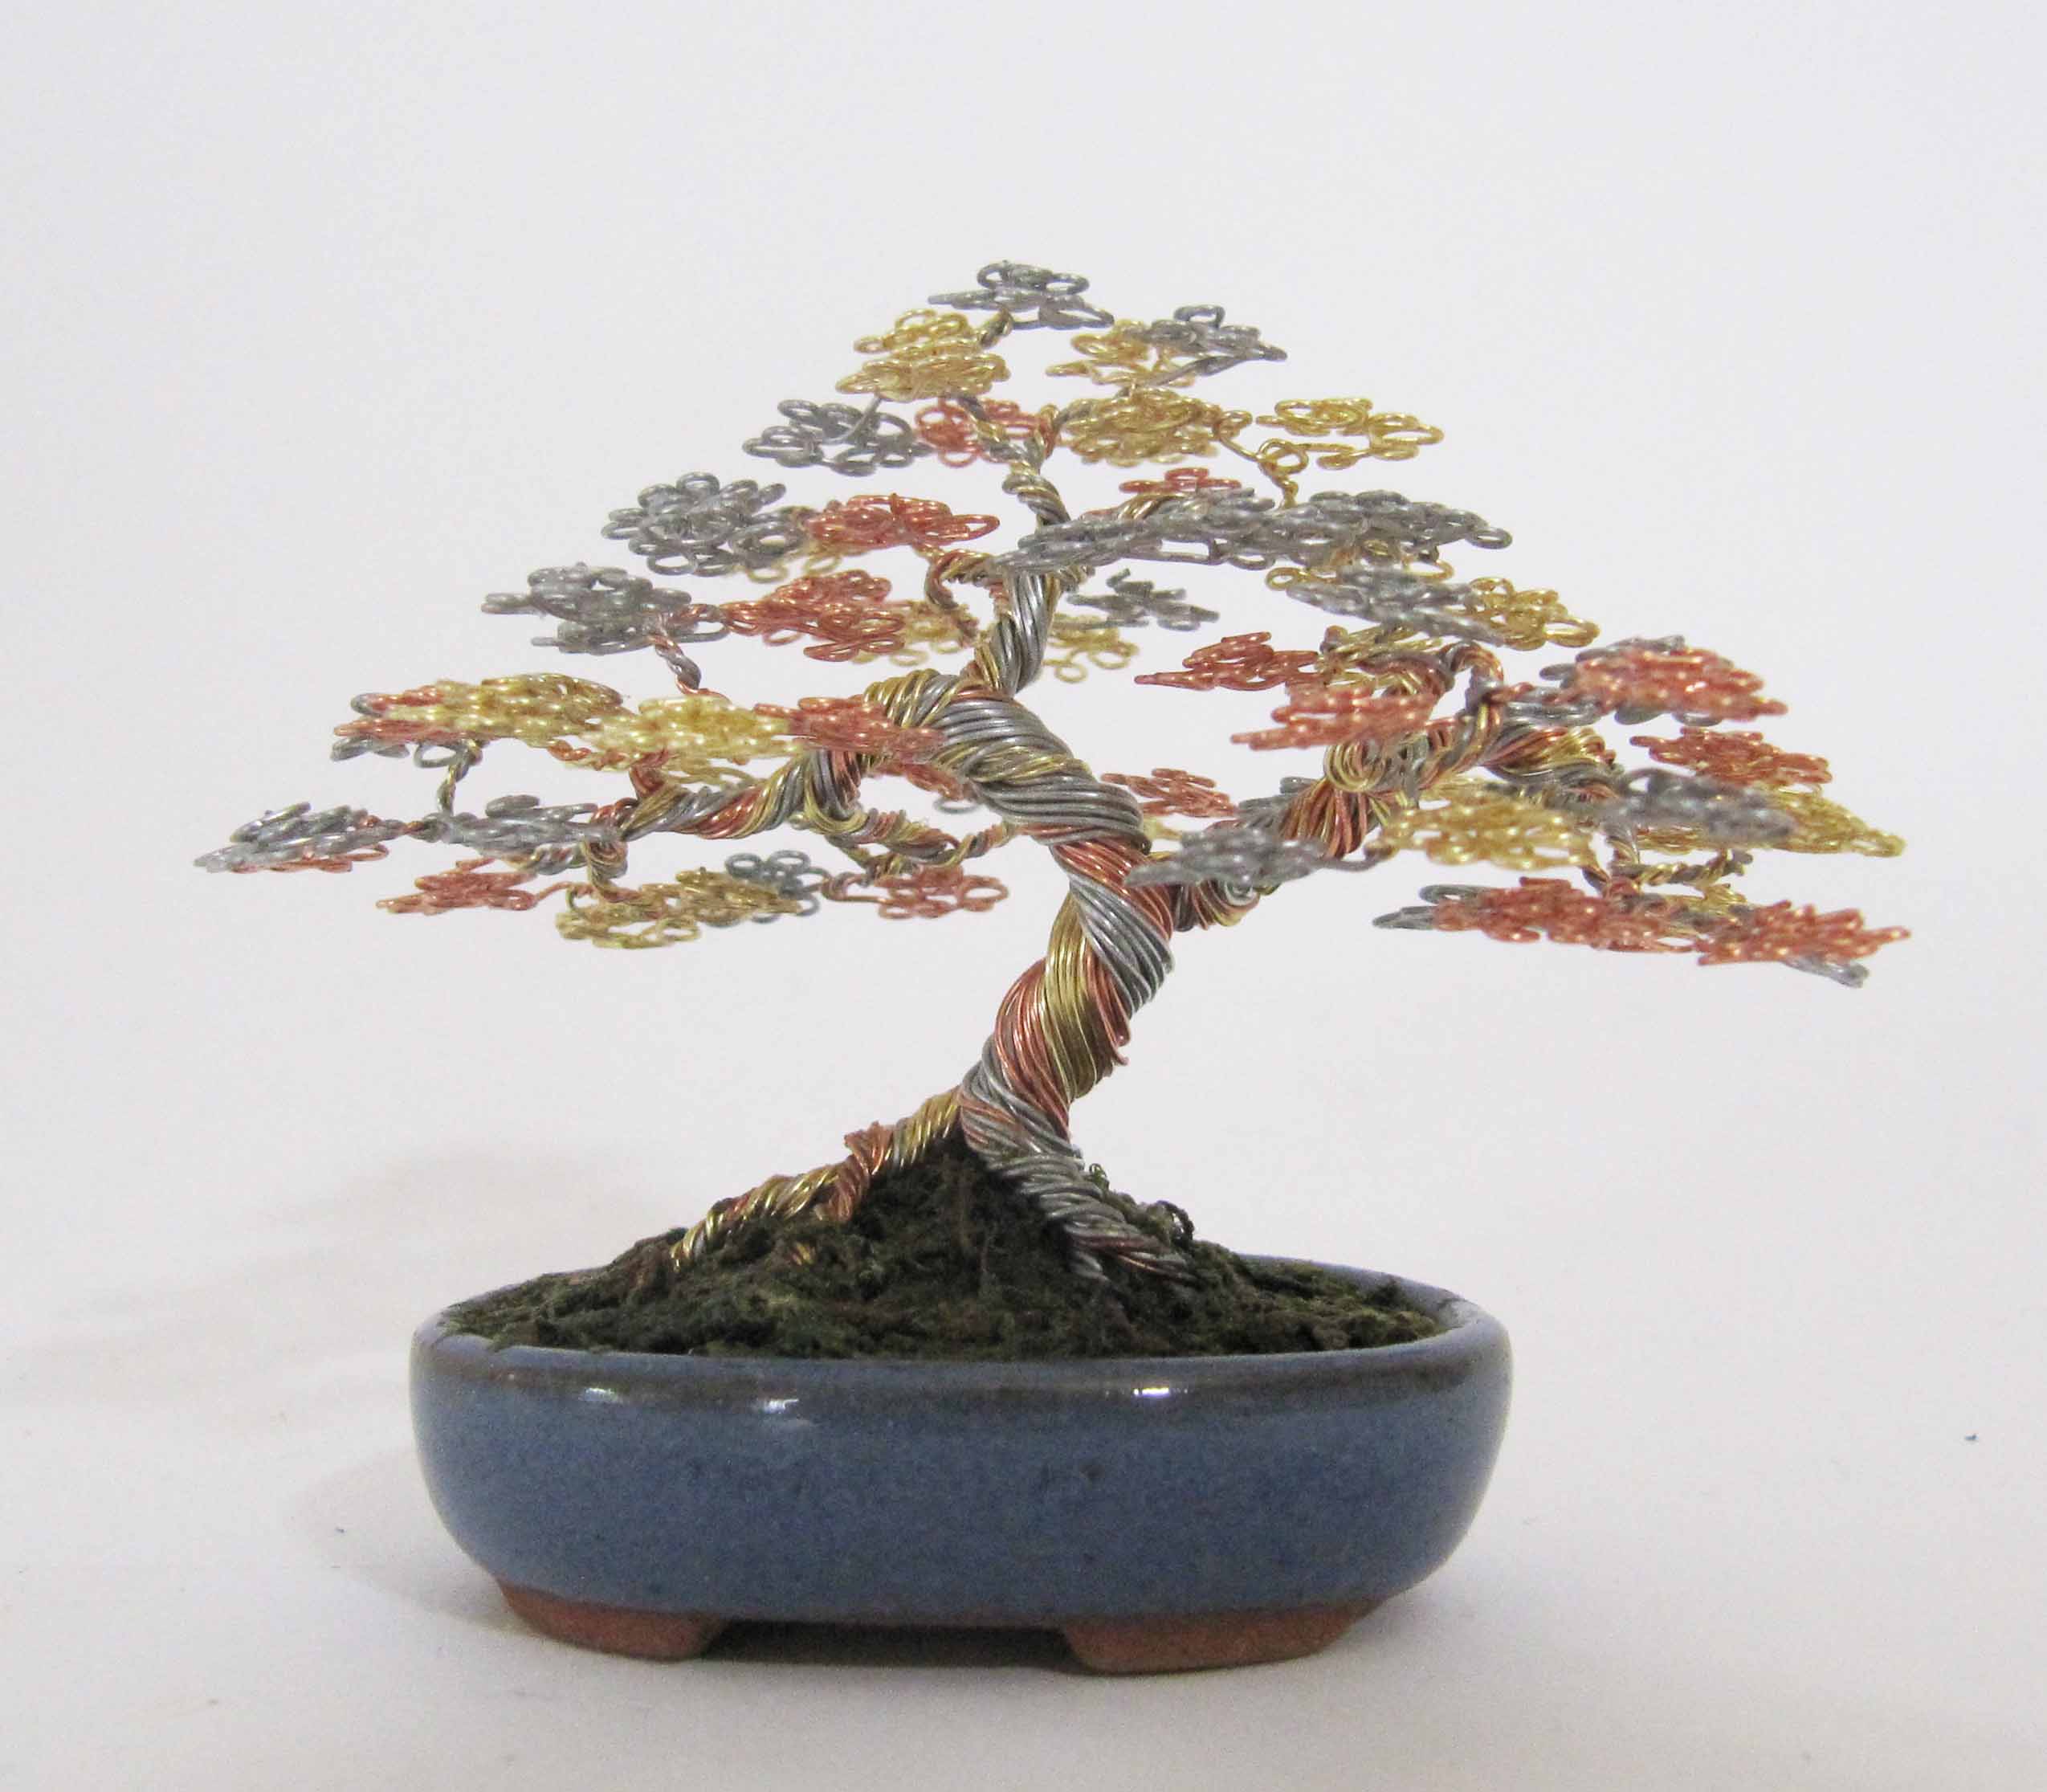 Ken To, Wire Bonsai Tree, 2012, a copper wire sculpture in the form of a bonsai tree. 7cm H